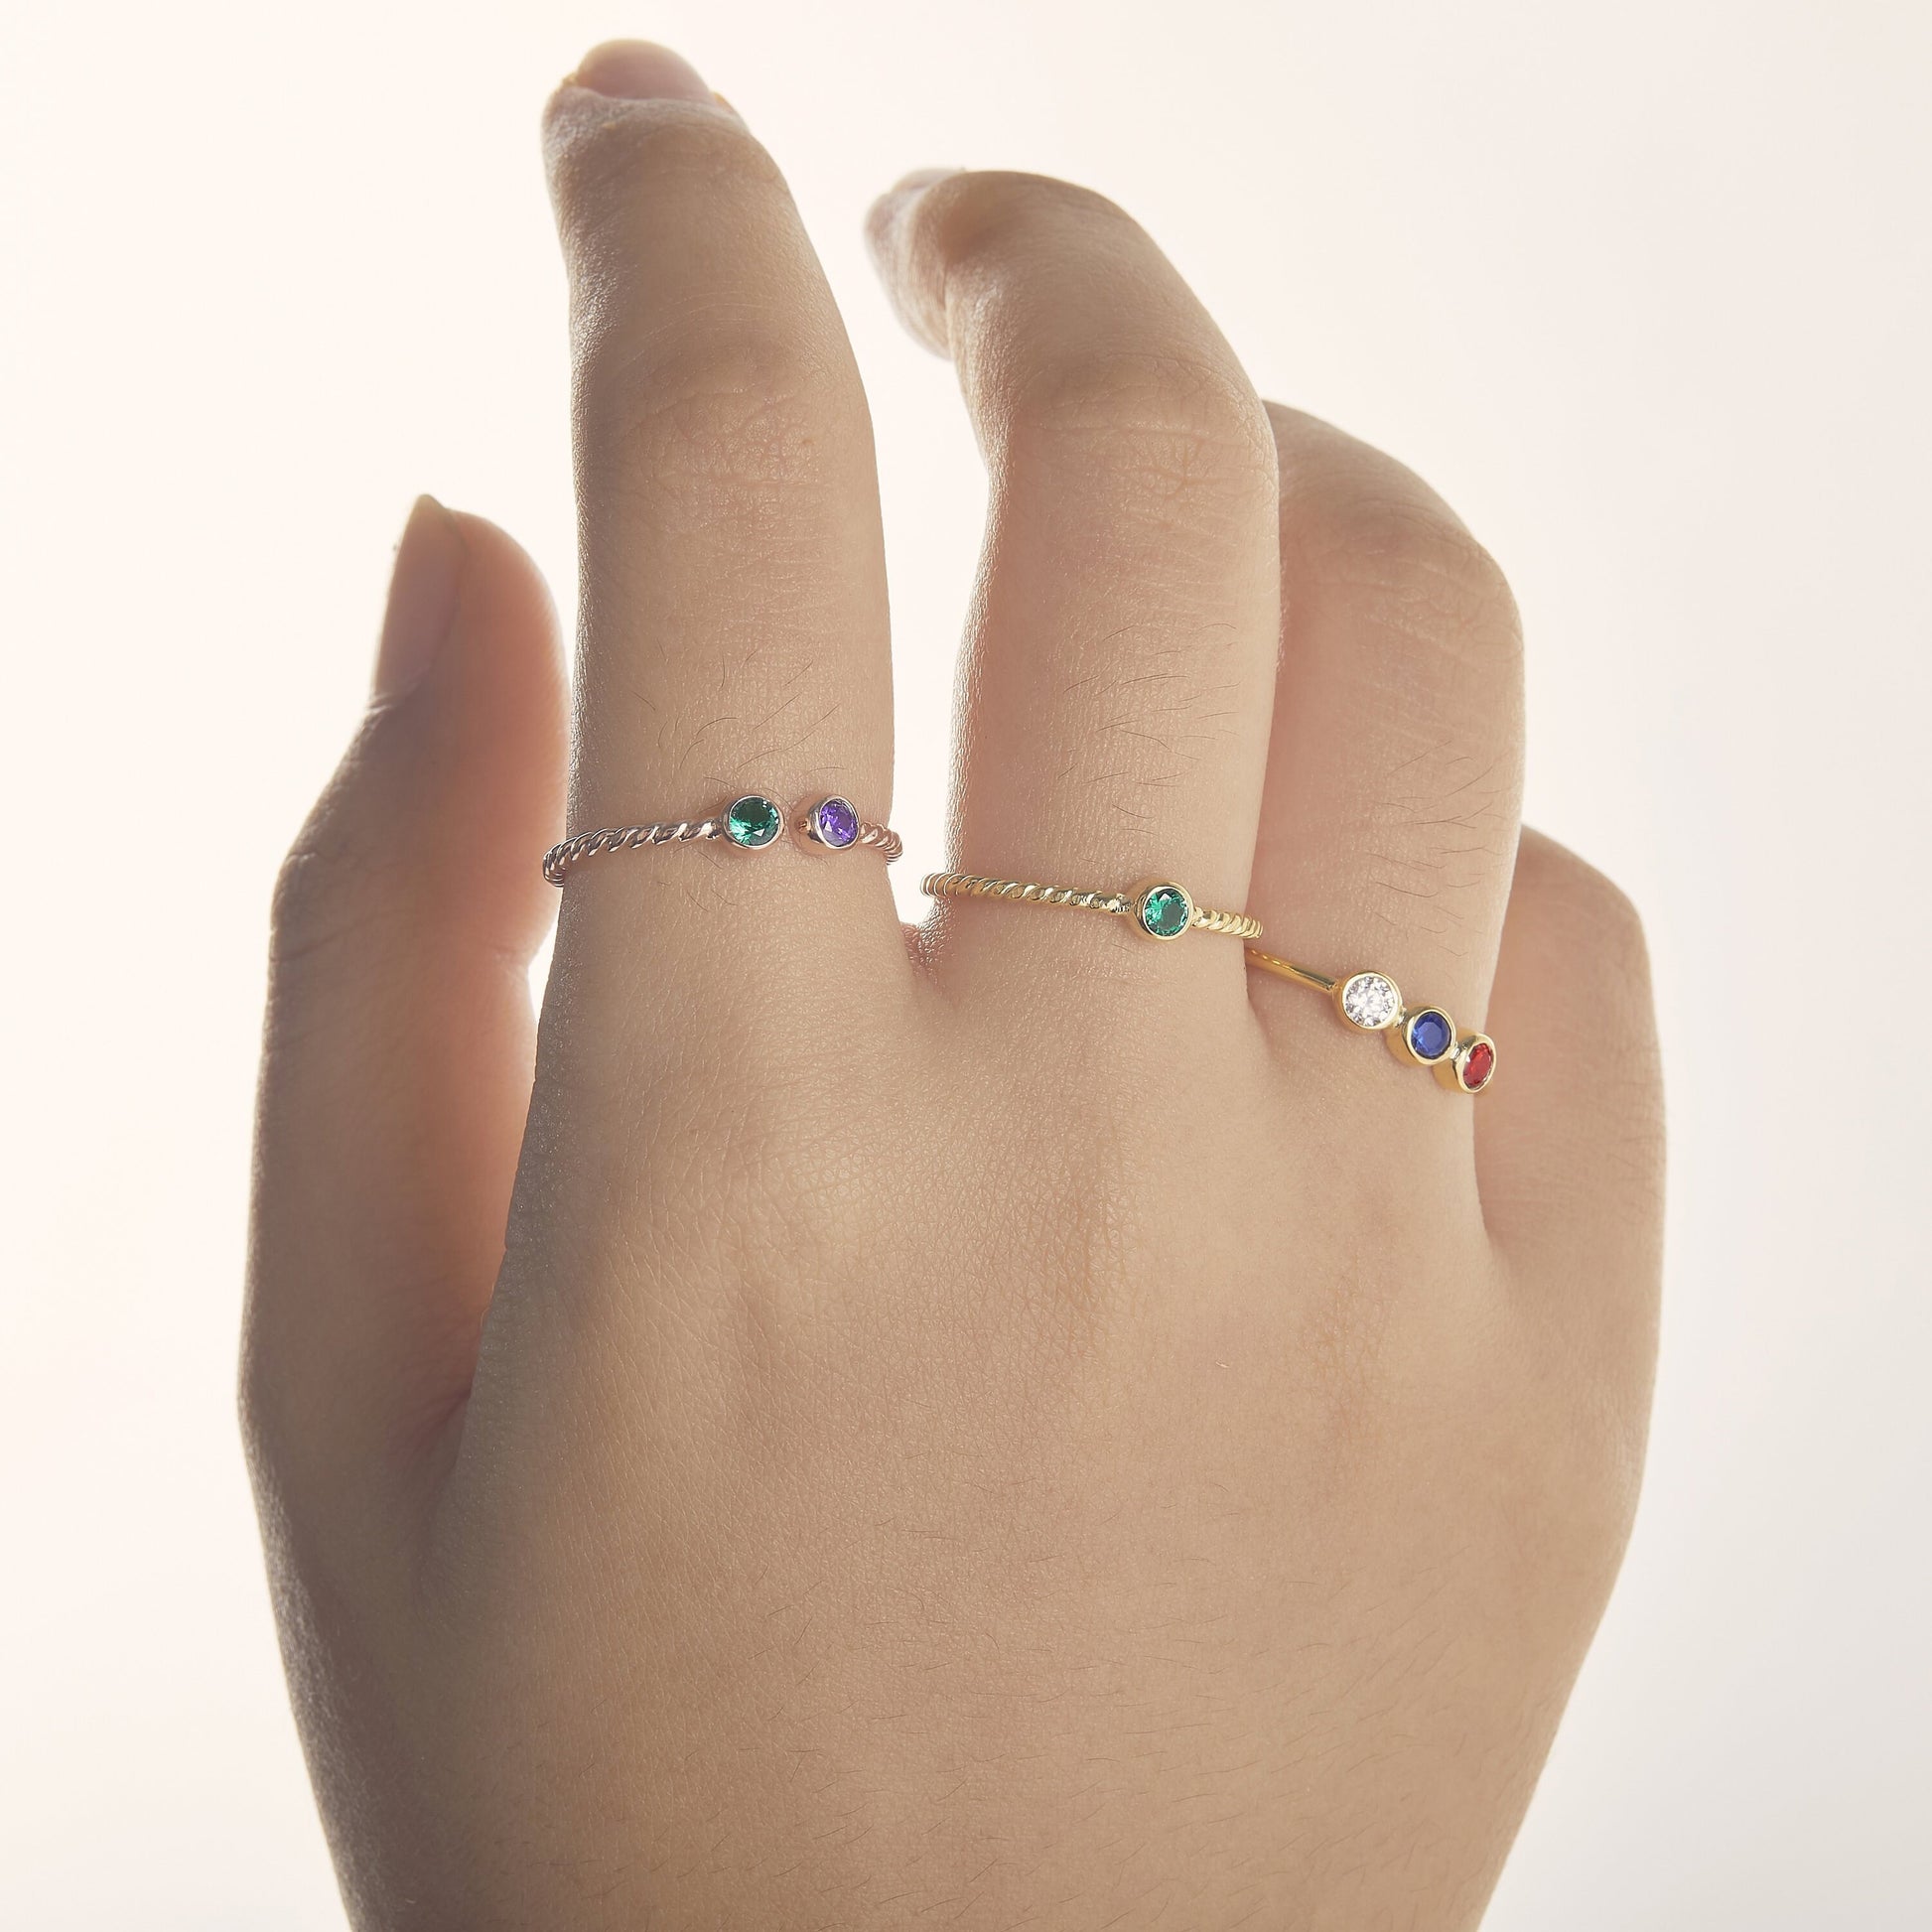 Stacking Ring | Family Ring | Dainty Promise Ring | Stackable Ring | Triple Birthstone Ring | Gemstone Ring | Birthstone Jewelry